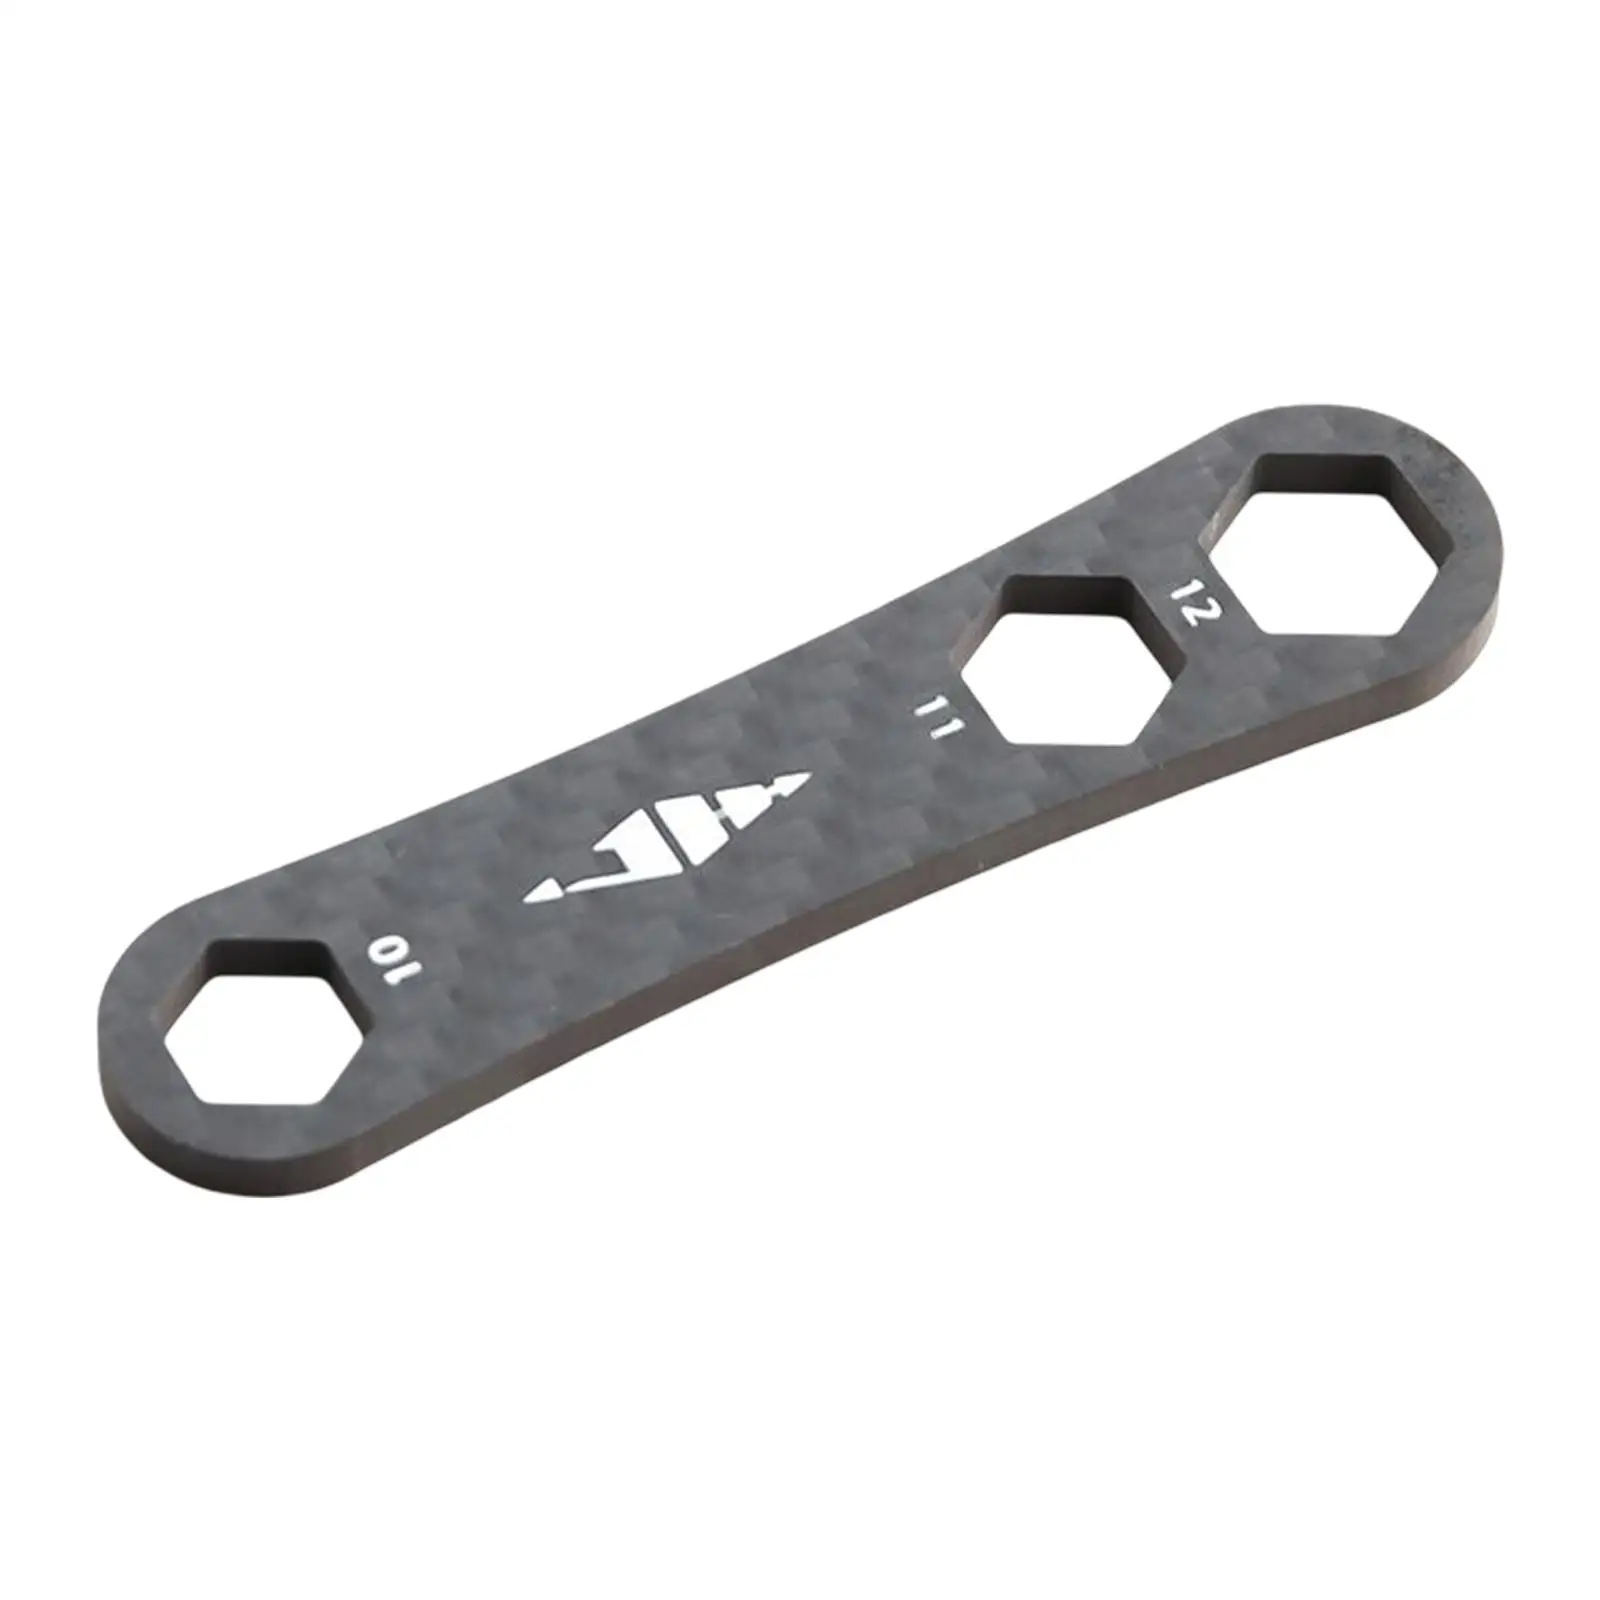 Outdoor Fishing Reel Care Maintenance Wrench Wrench for Outdoor Activities Fishing Enthusiasts